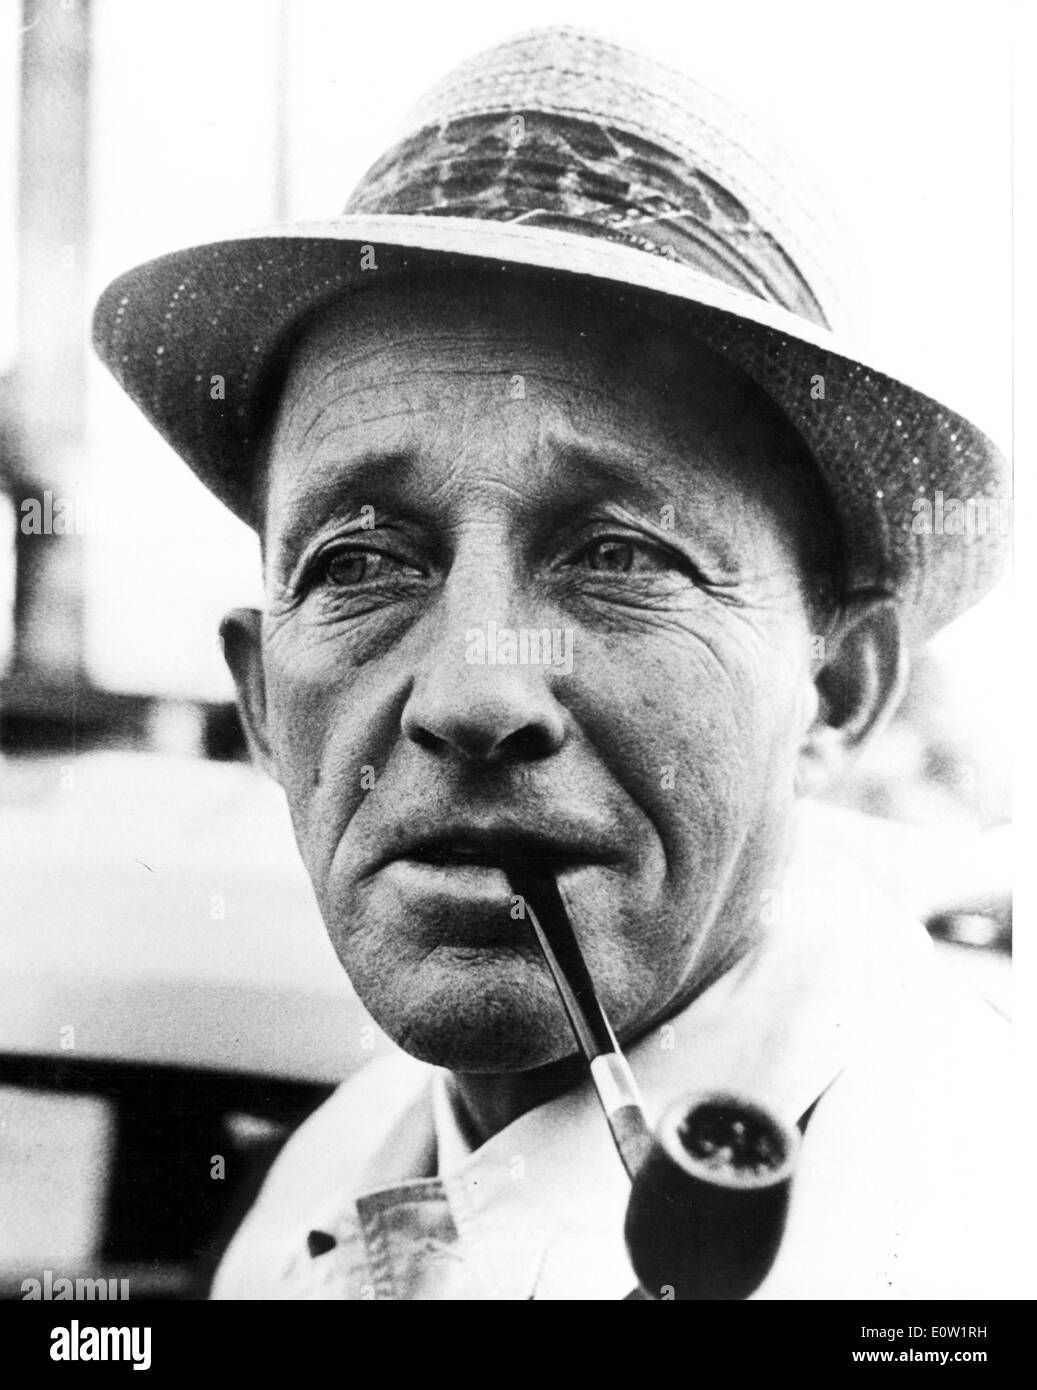 Bing Crosby with a pipe in his mouth Stock Photo